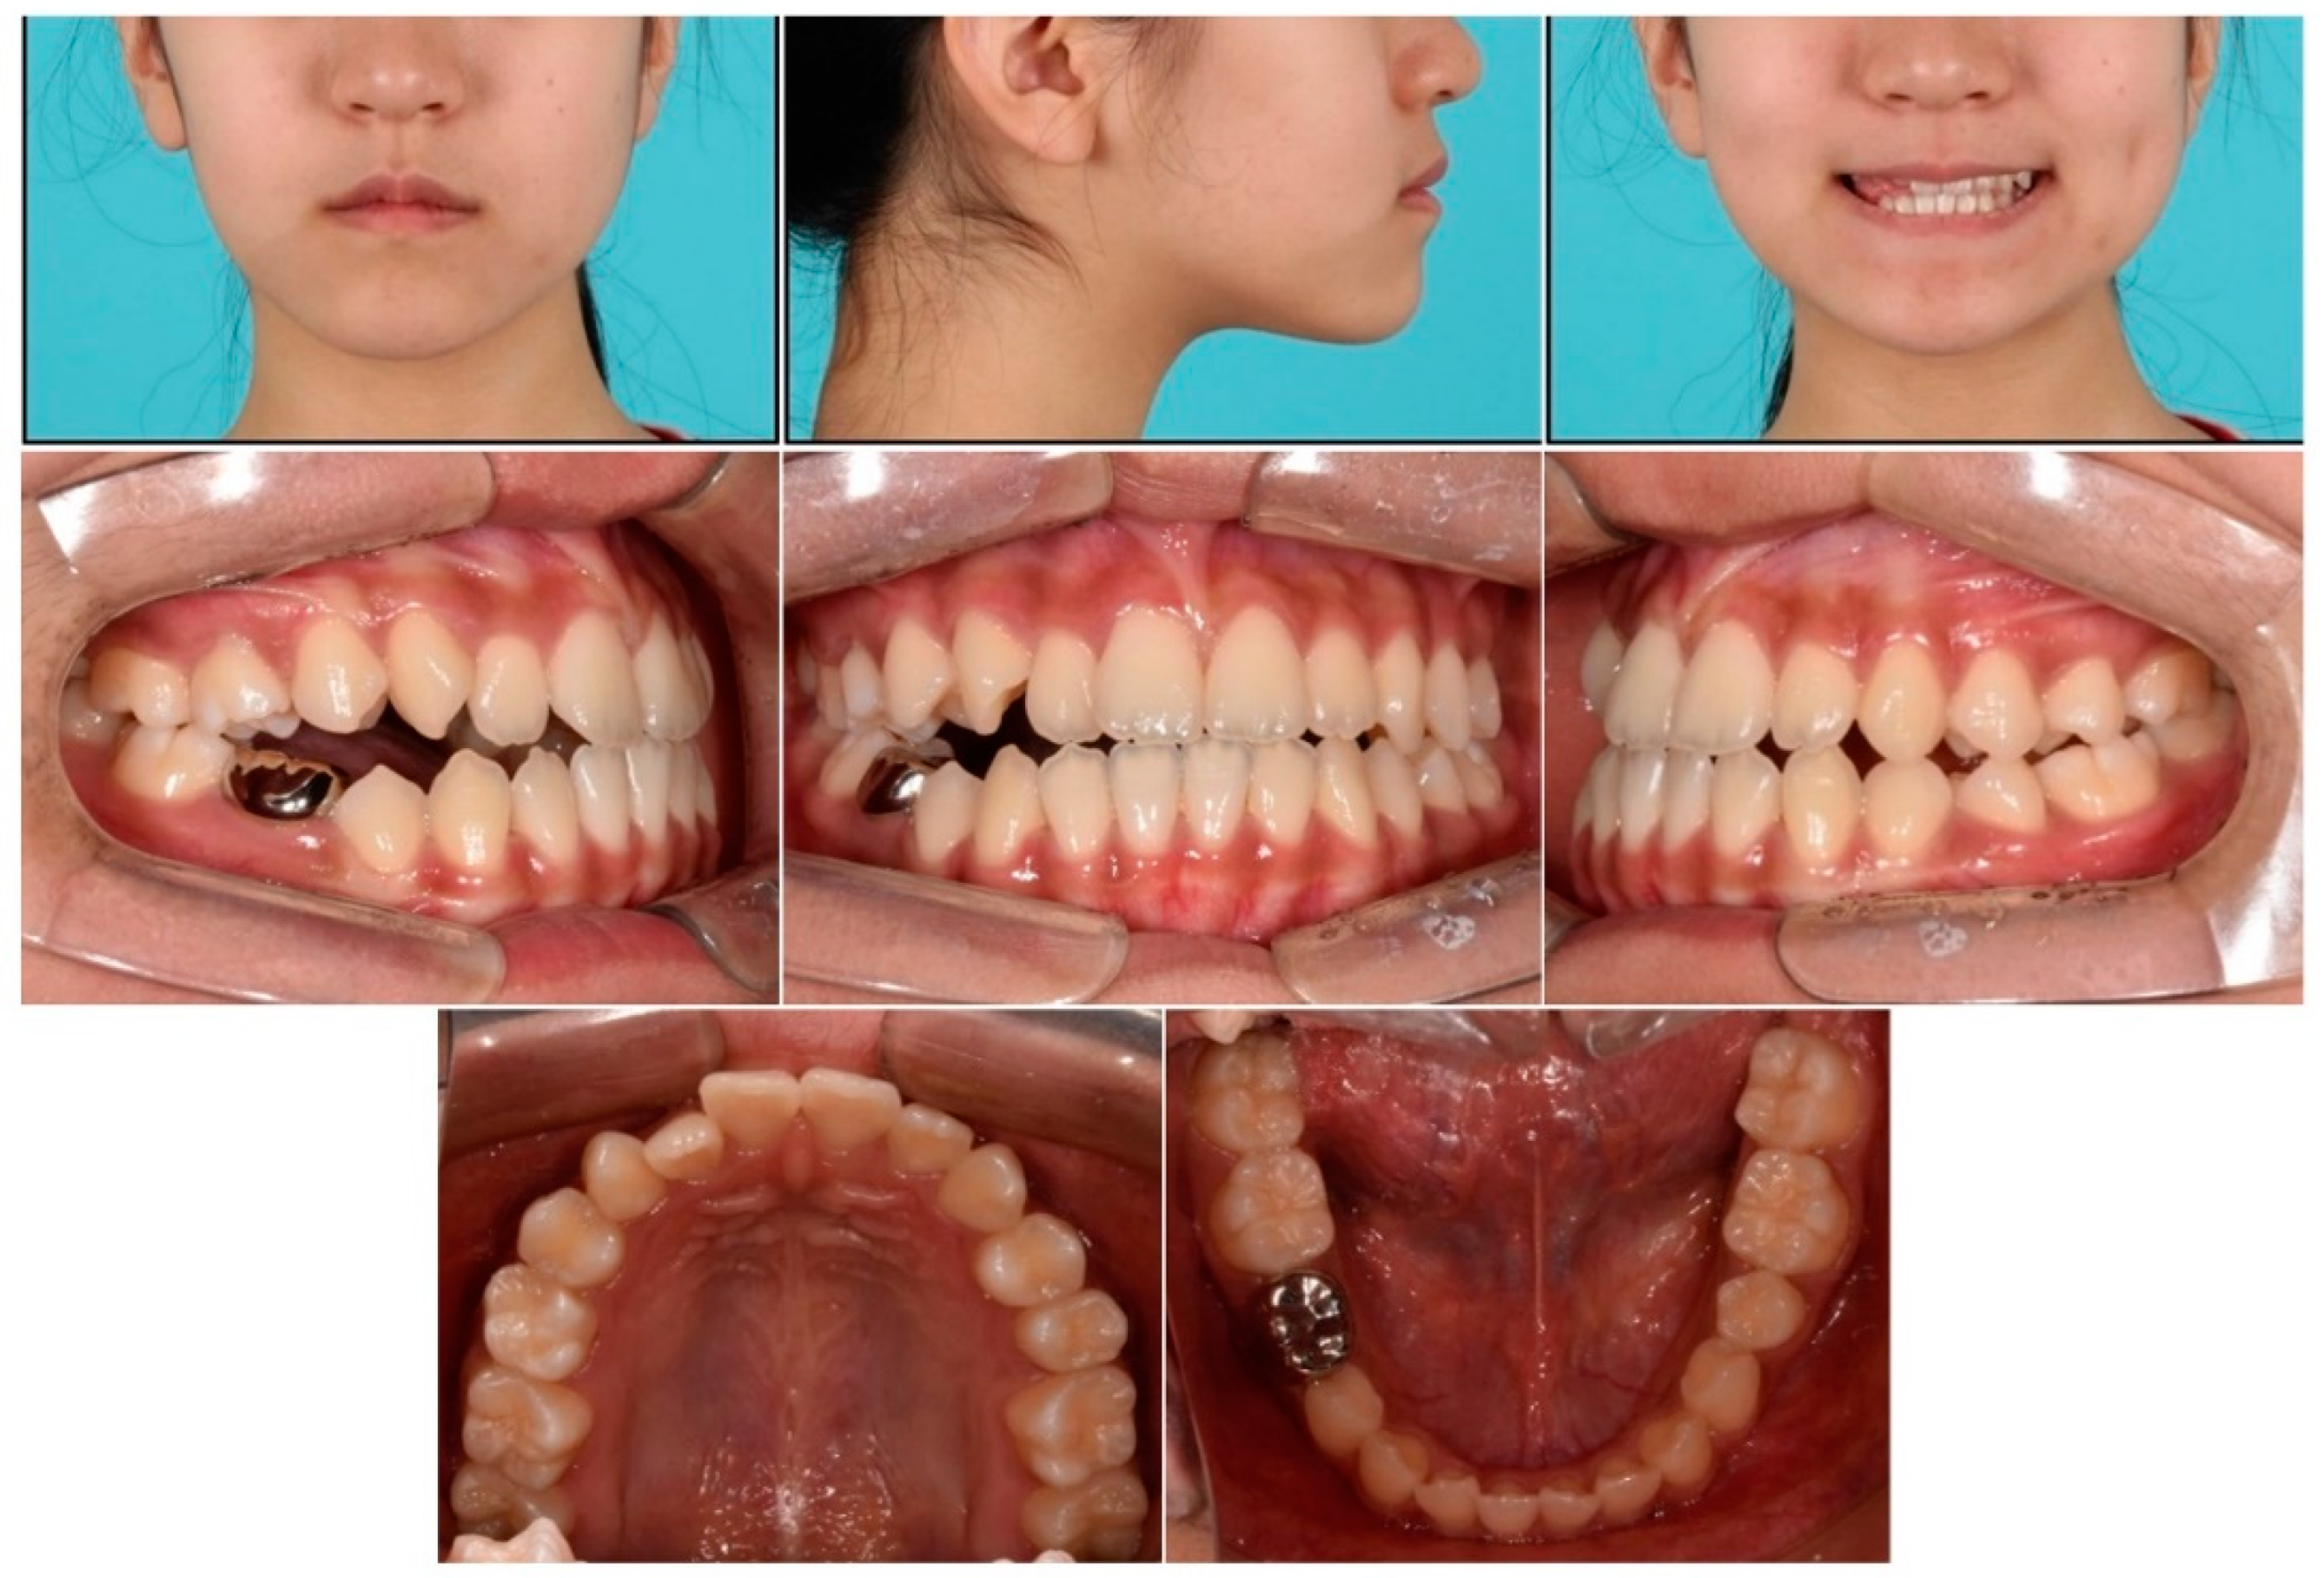 17-year-old female with Class II malocclusion and traumatic